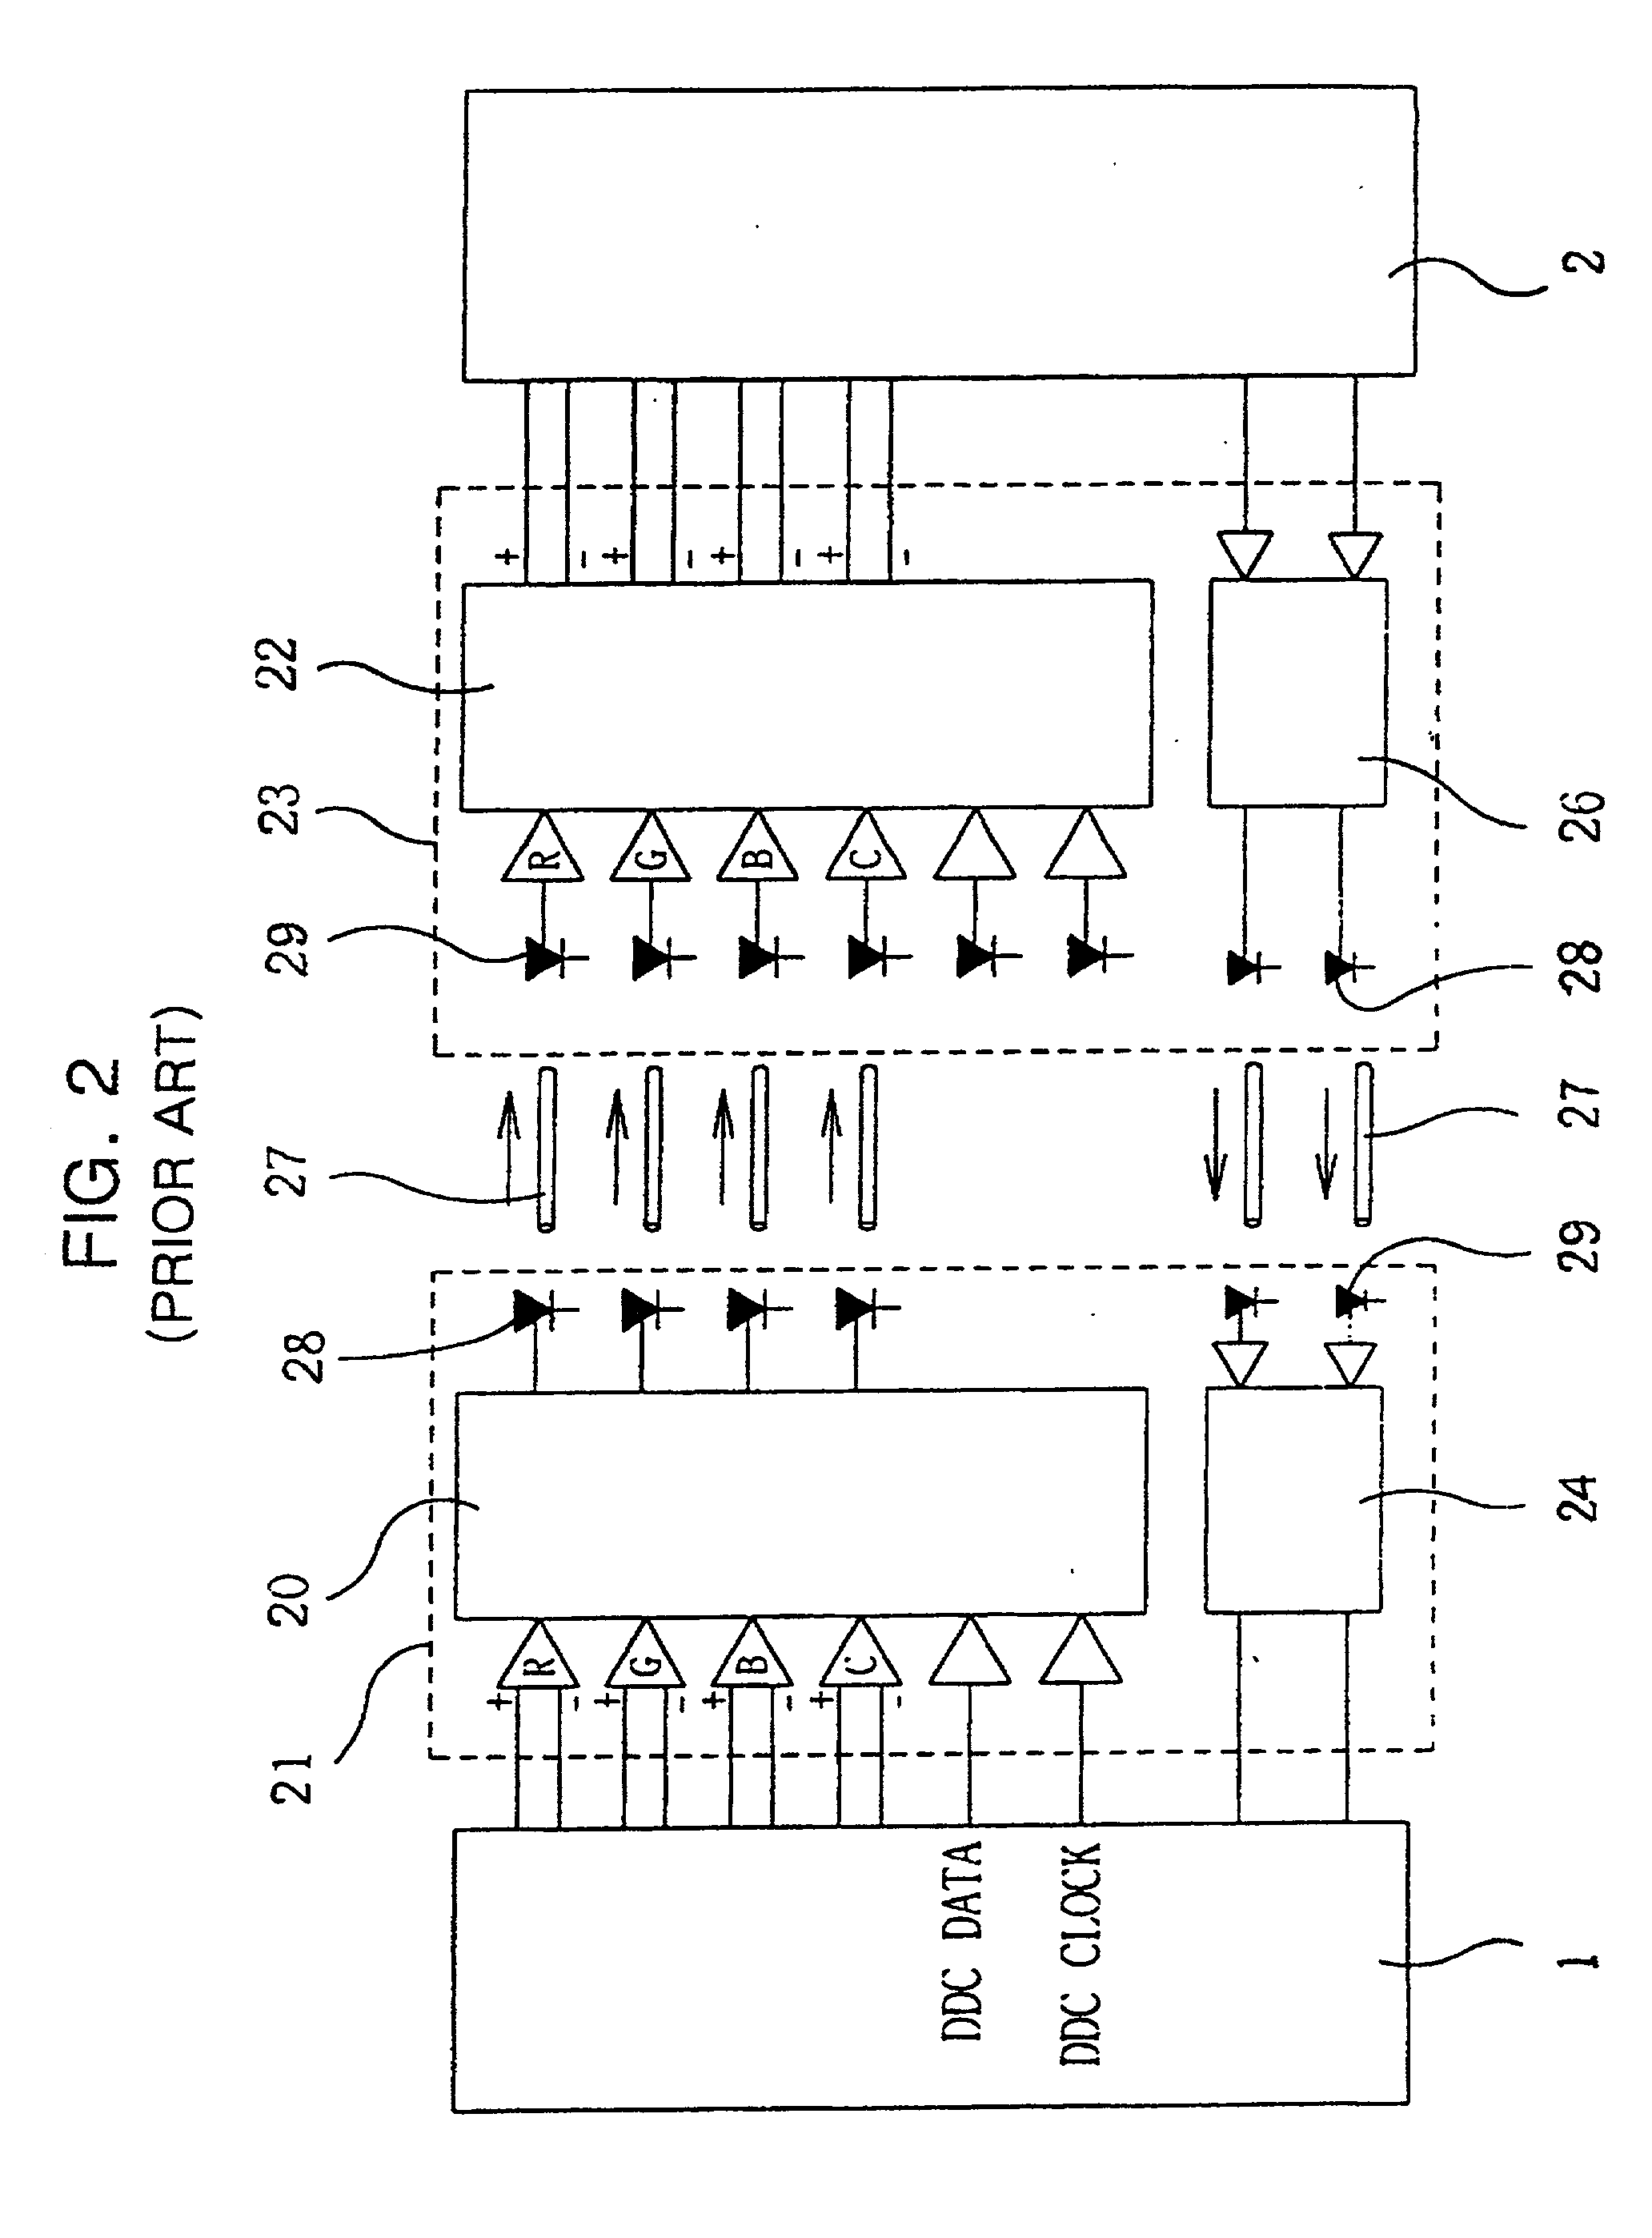 Digital video signal interface module for transferring signals to a long distance